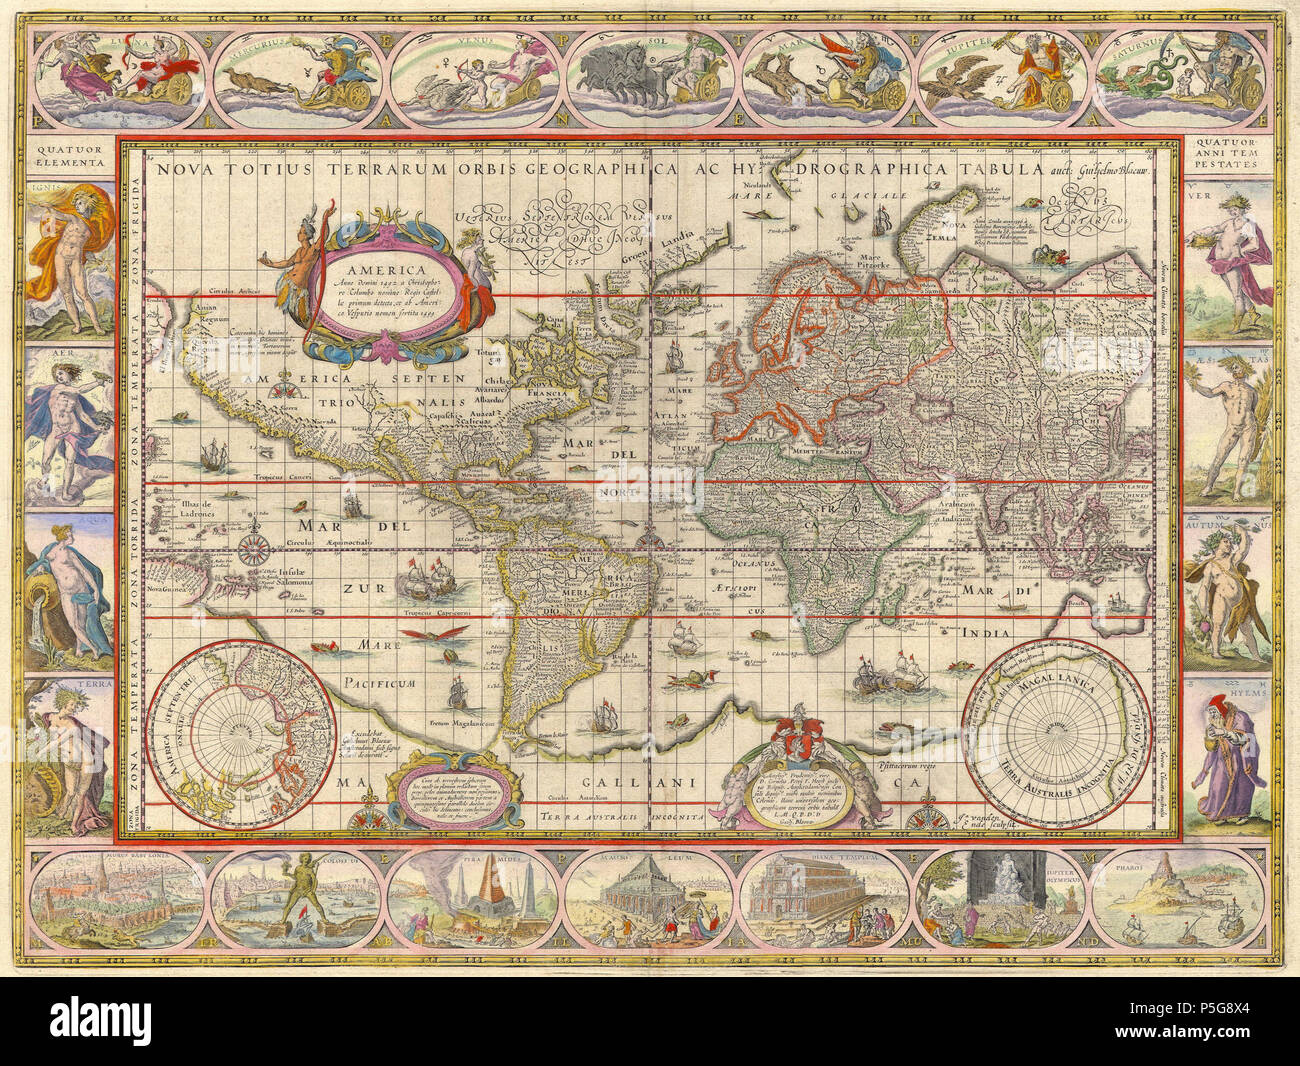 N/A. English: The World map created by Willem Blaeu :  ,    . 1635. Willem Blaeu 34 20101208105459!Willem Blaeu - Nova totius terrarum orbis geographica ac hydrographica tabula Stock Photo